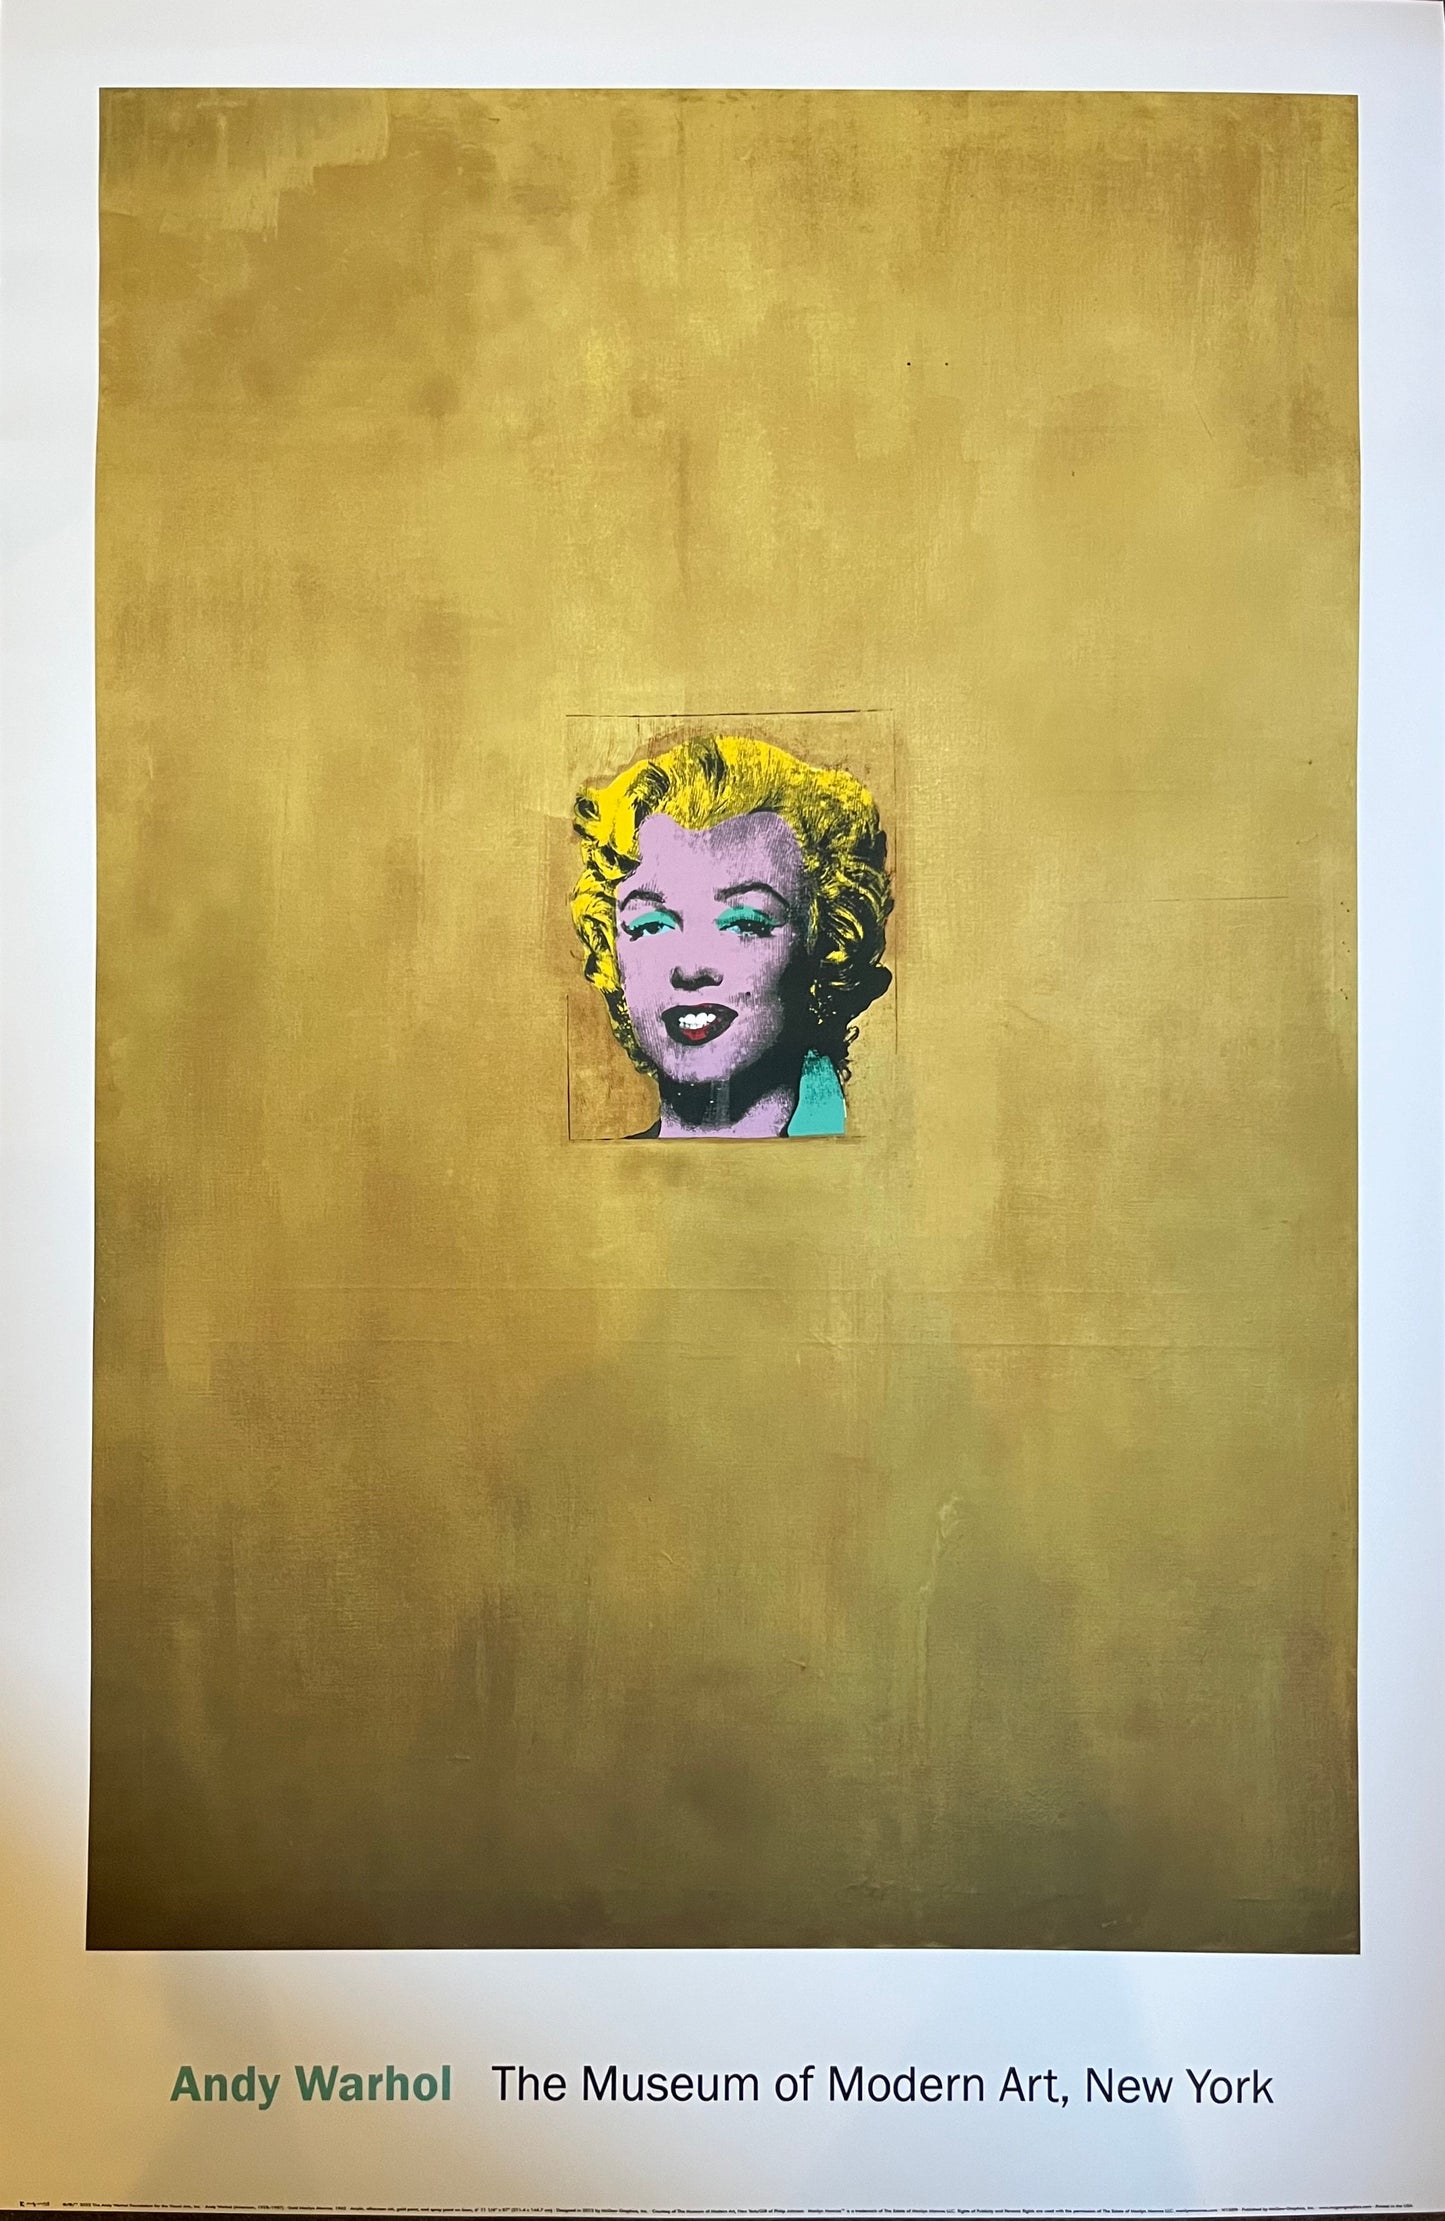 Andy Warhol, Gold Marilyn Monroe, 1962, Offsetlithographie